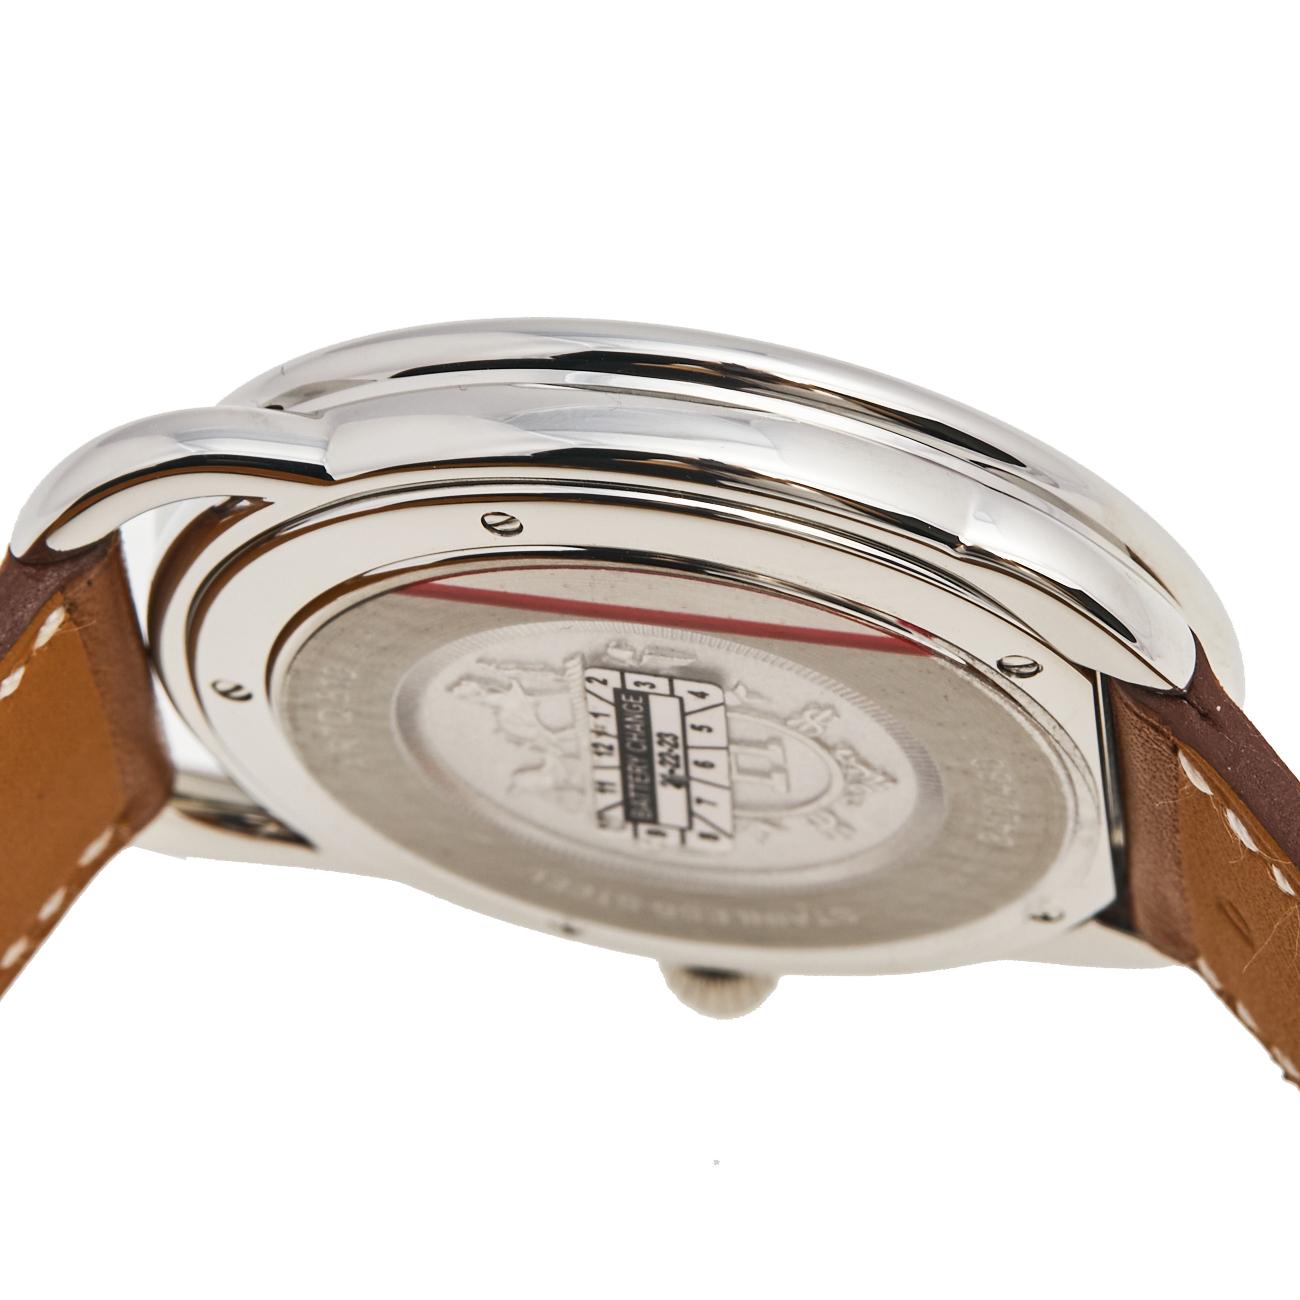 Contemporary Hermes White Stainless Steel Leather Arceau AR7Q.810 Men's Wristwatch 40 mm